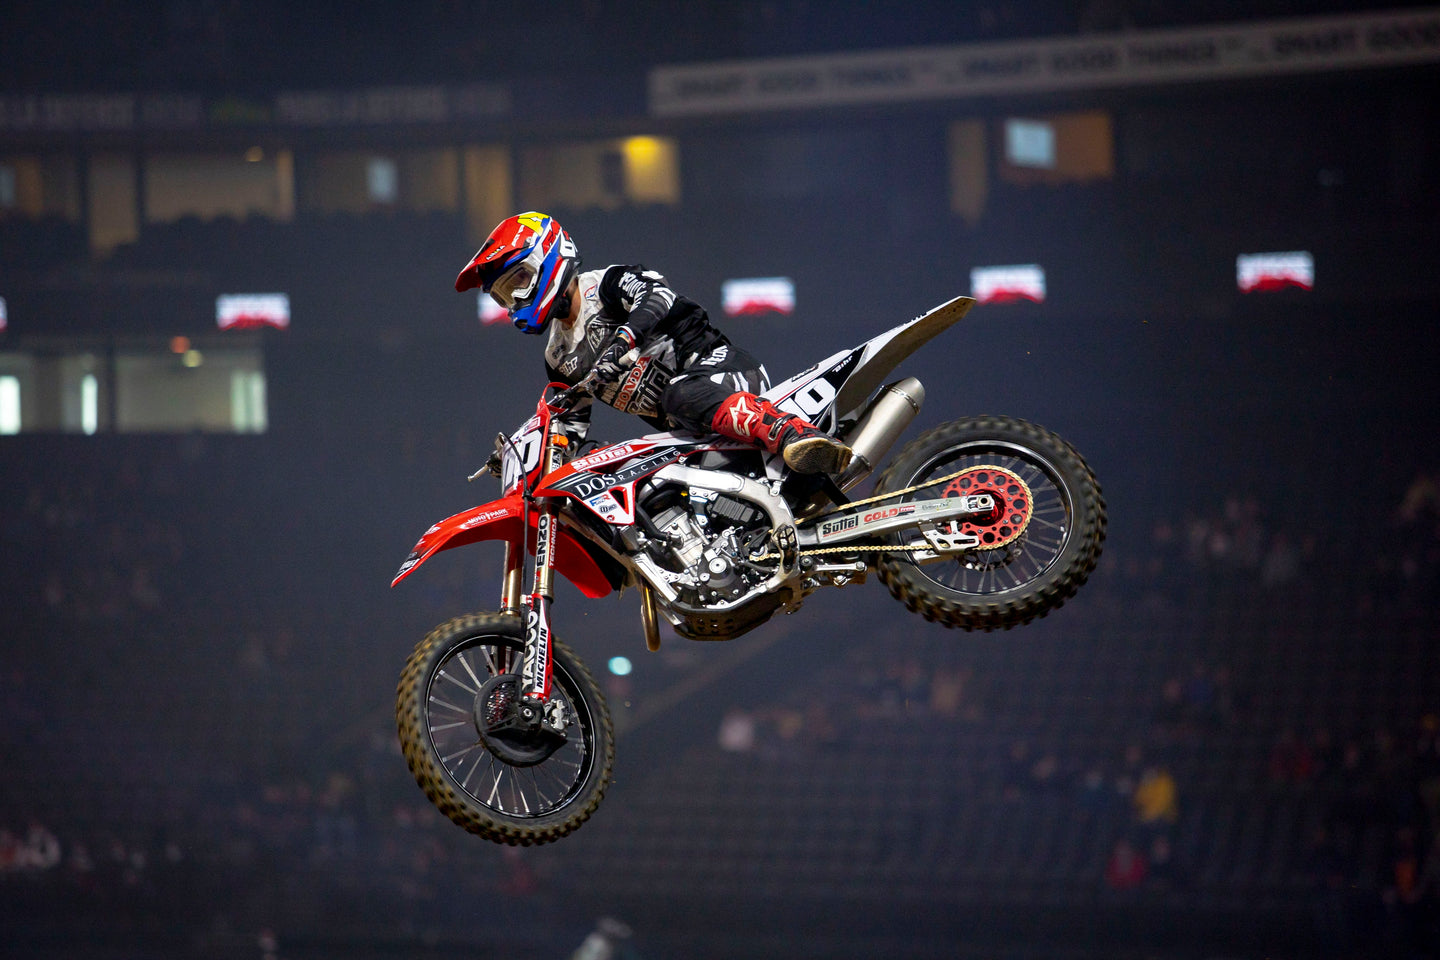 KYLE PETERS IS THE PRINCE OF PARIS AFTER CLEAN SWEEP IN SX2 CLASS